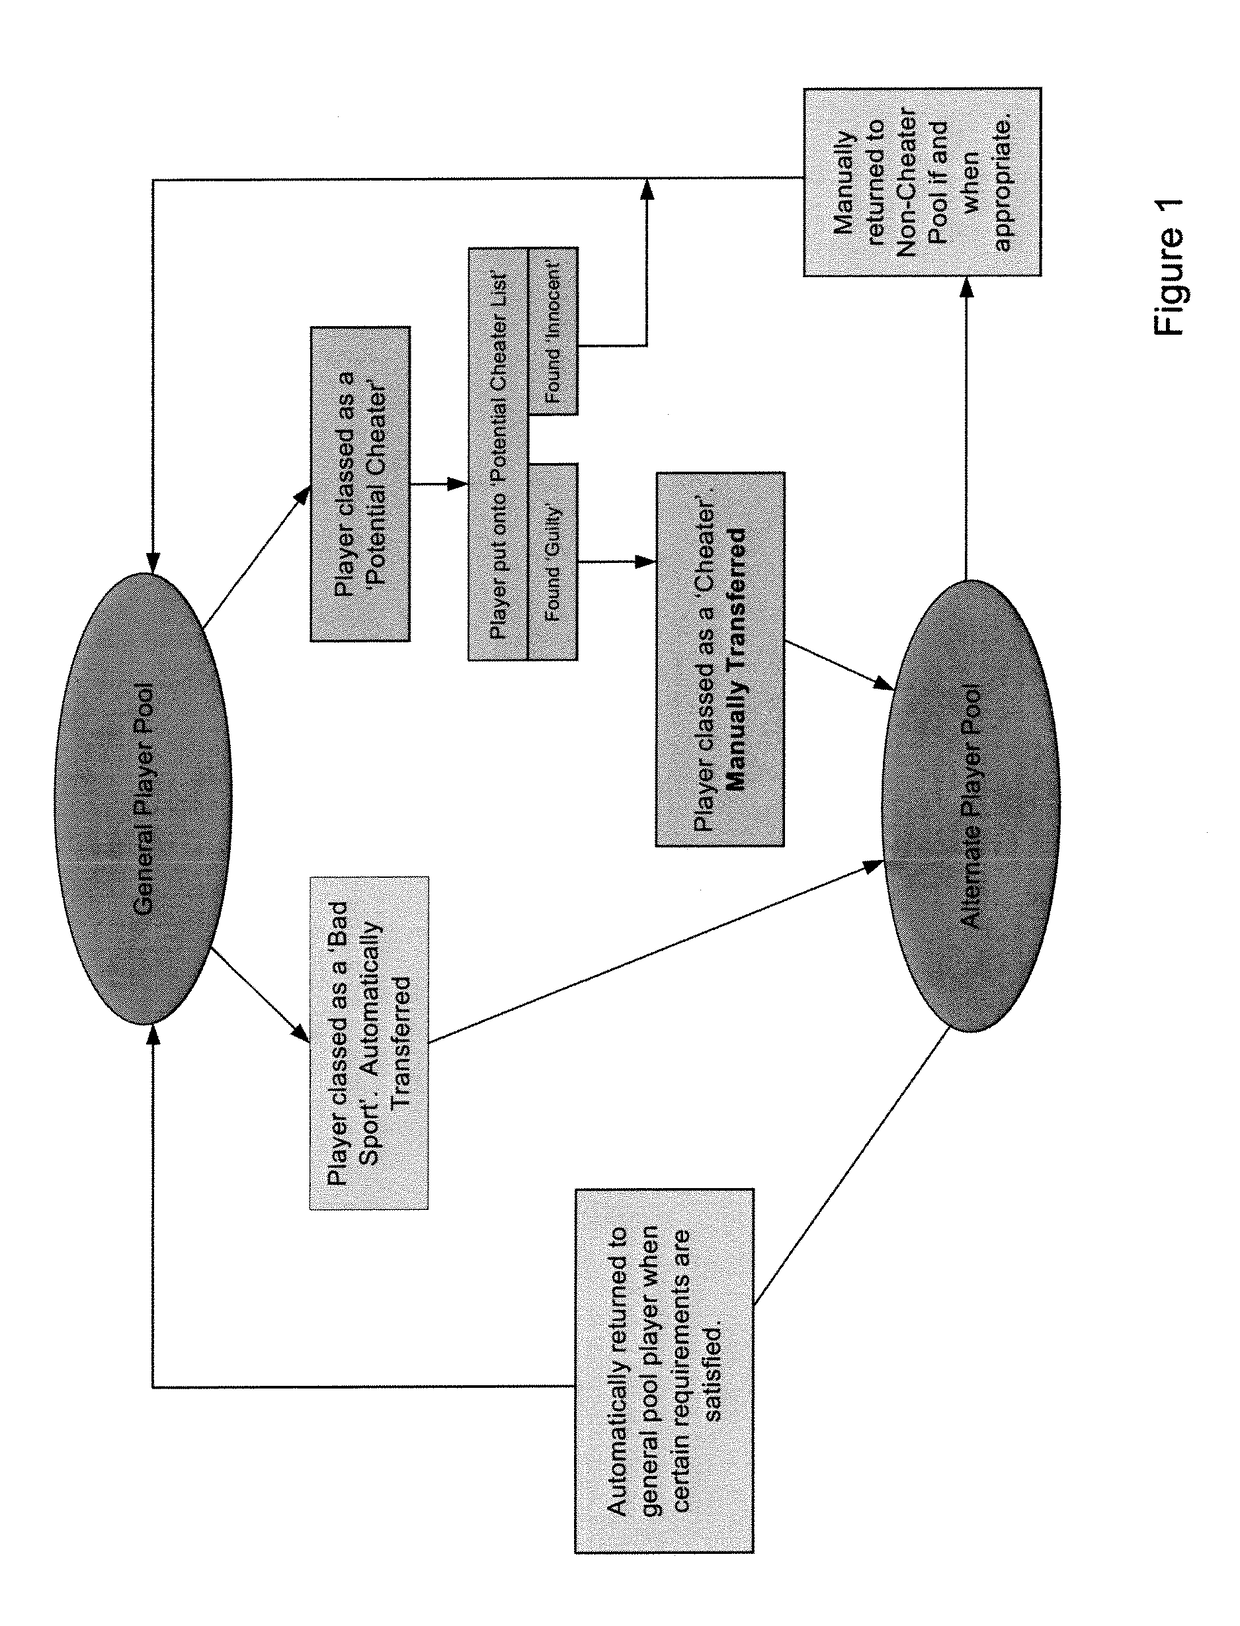 System and method for online community management